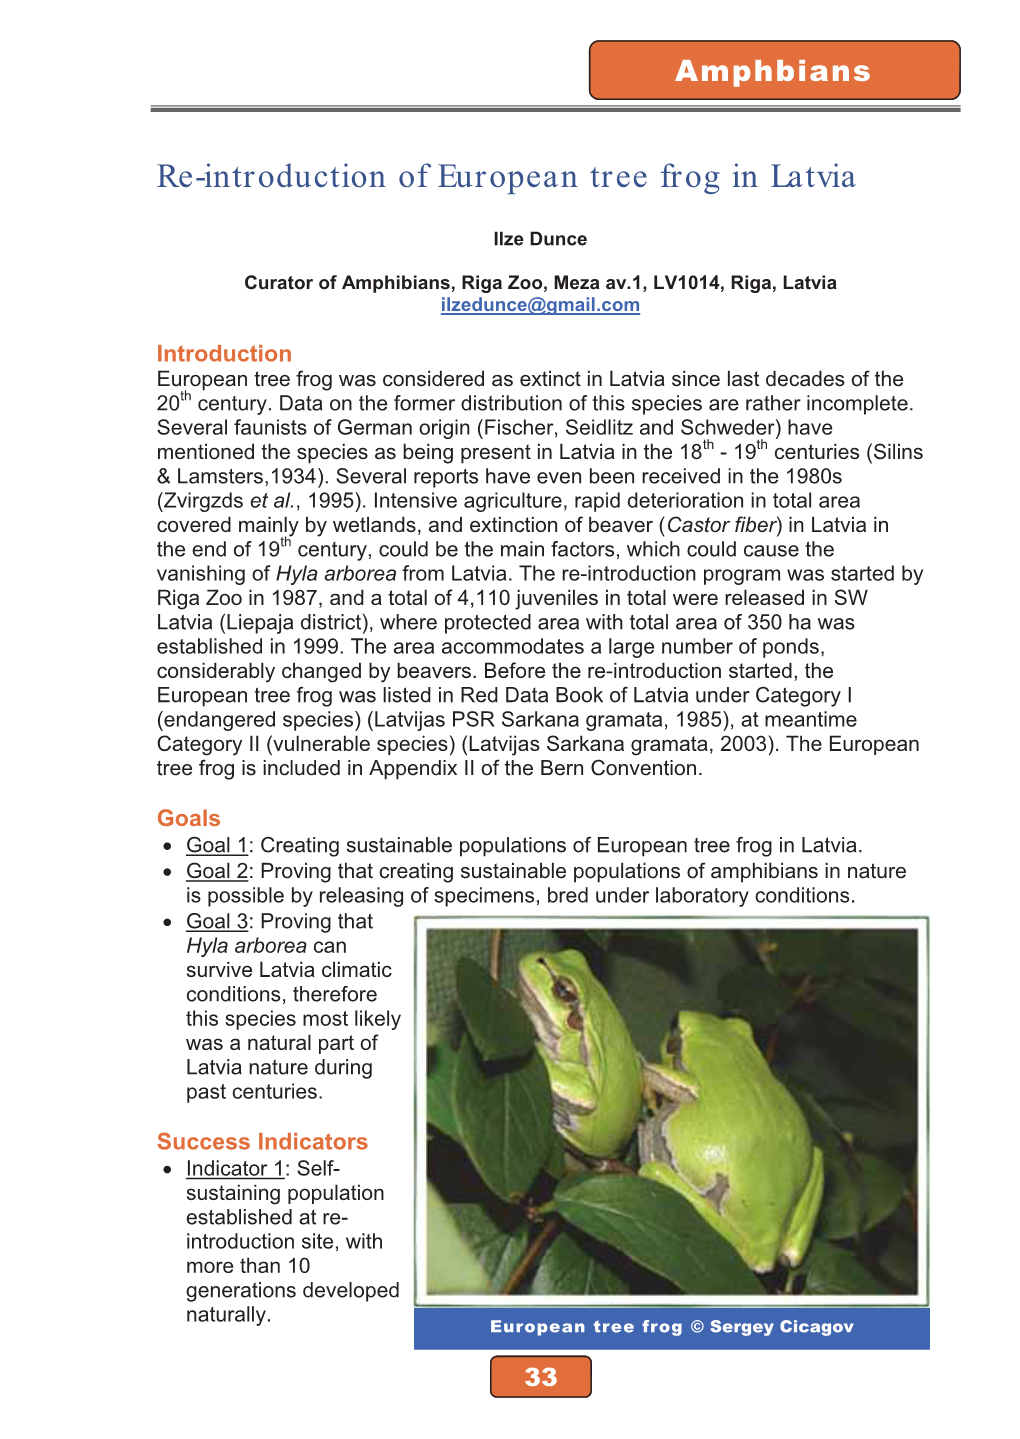 Re-Introduction of European Tree Frog in Latvia